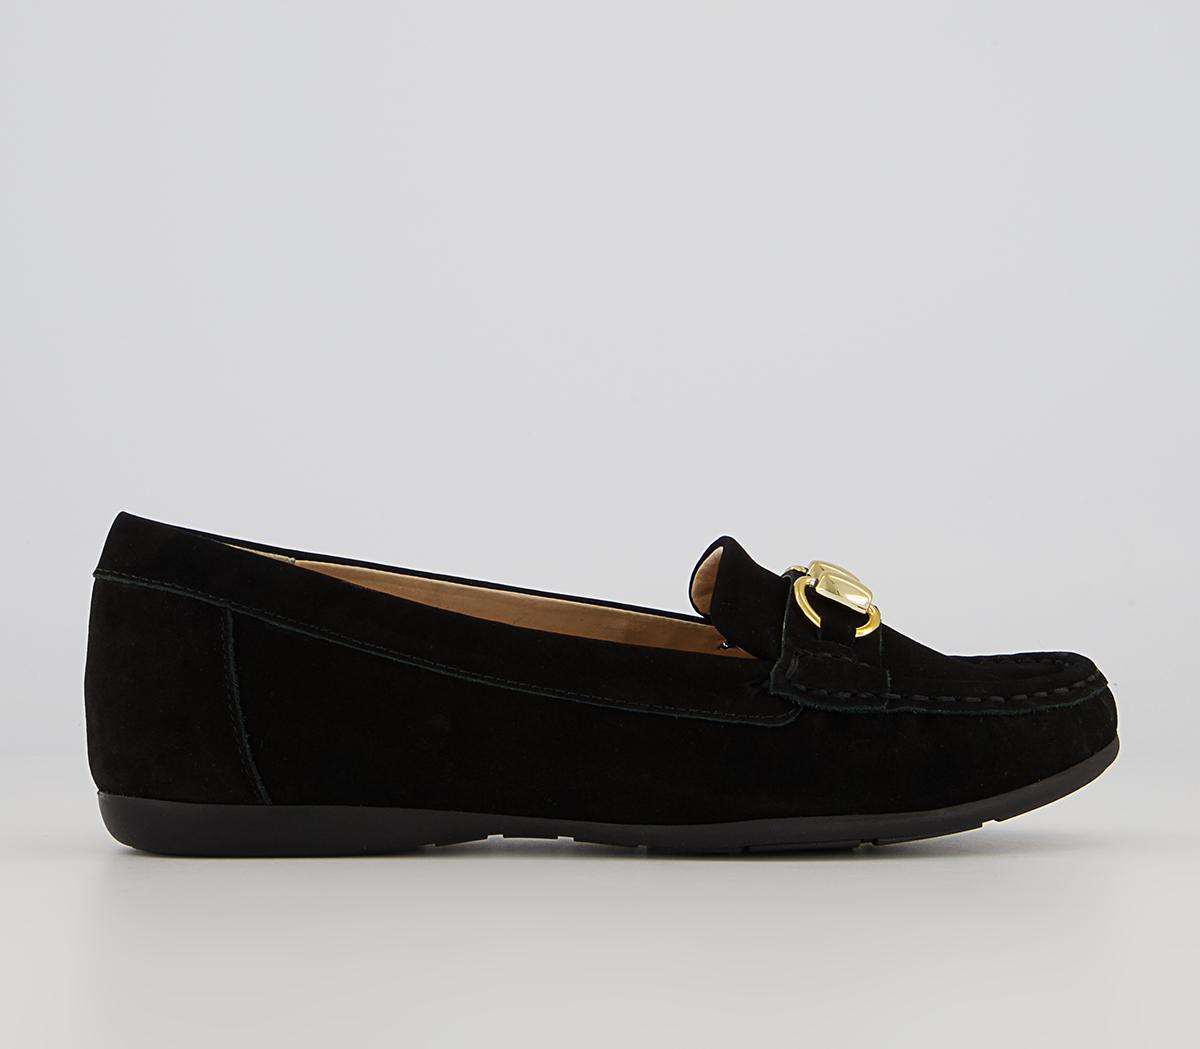 OFFICE Filly Soft Loafers Black Nubuck - Women’s Loafers